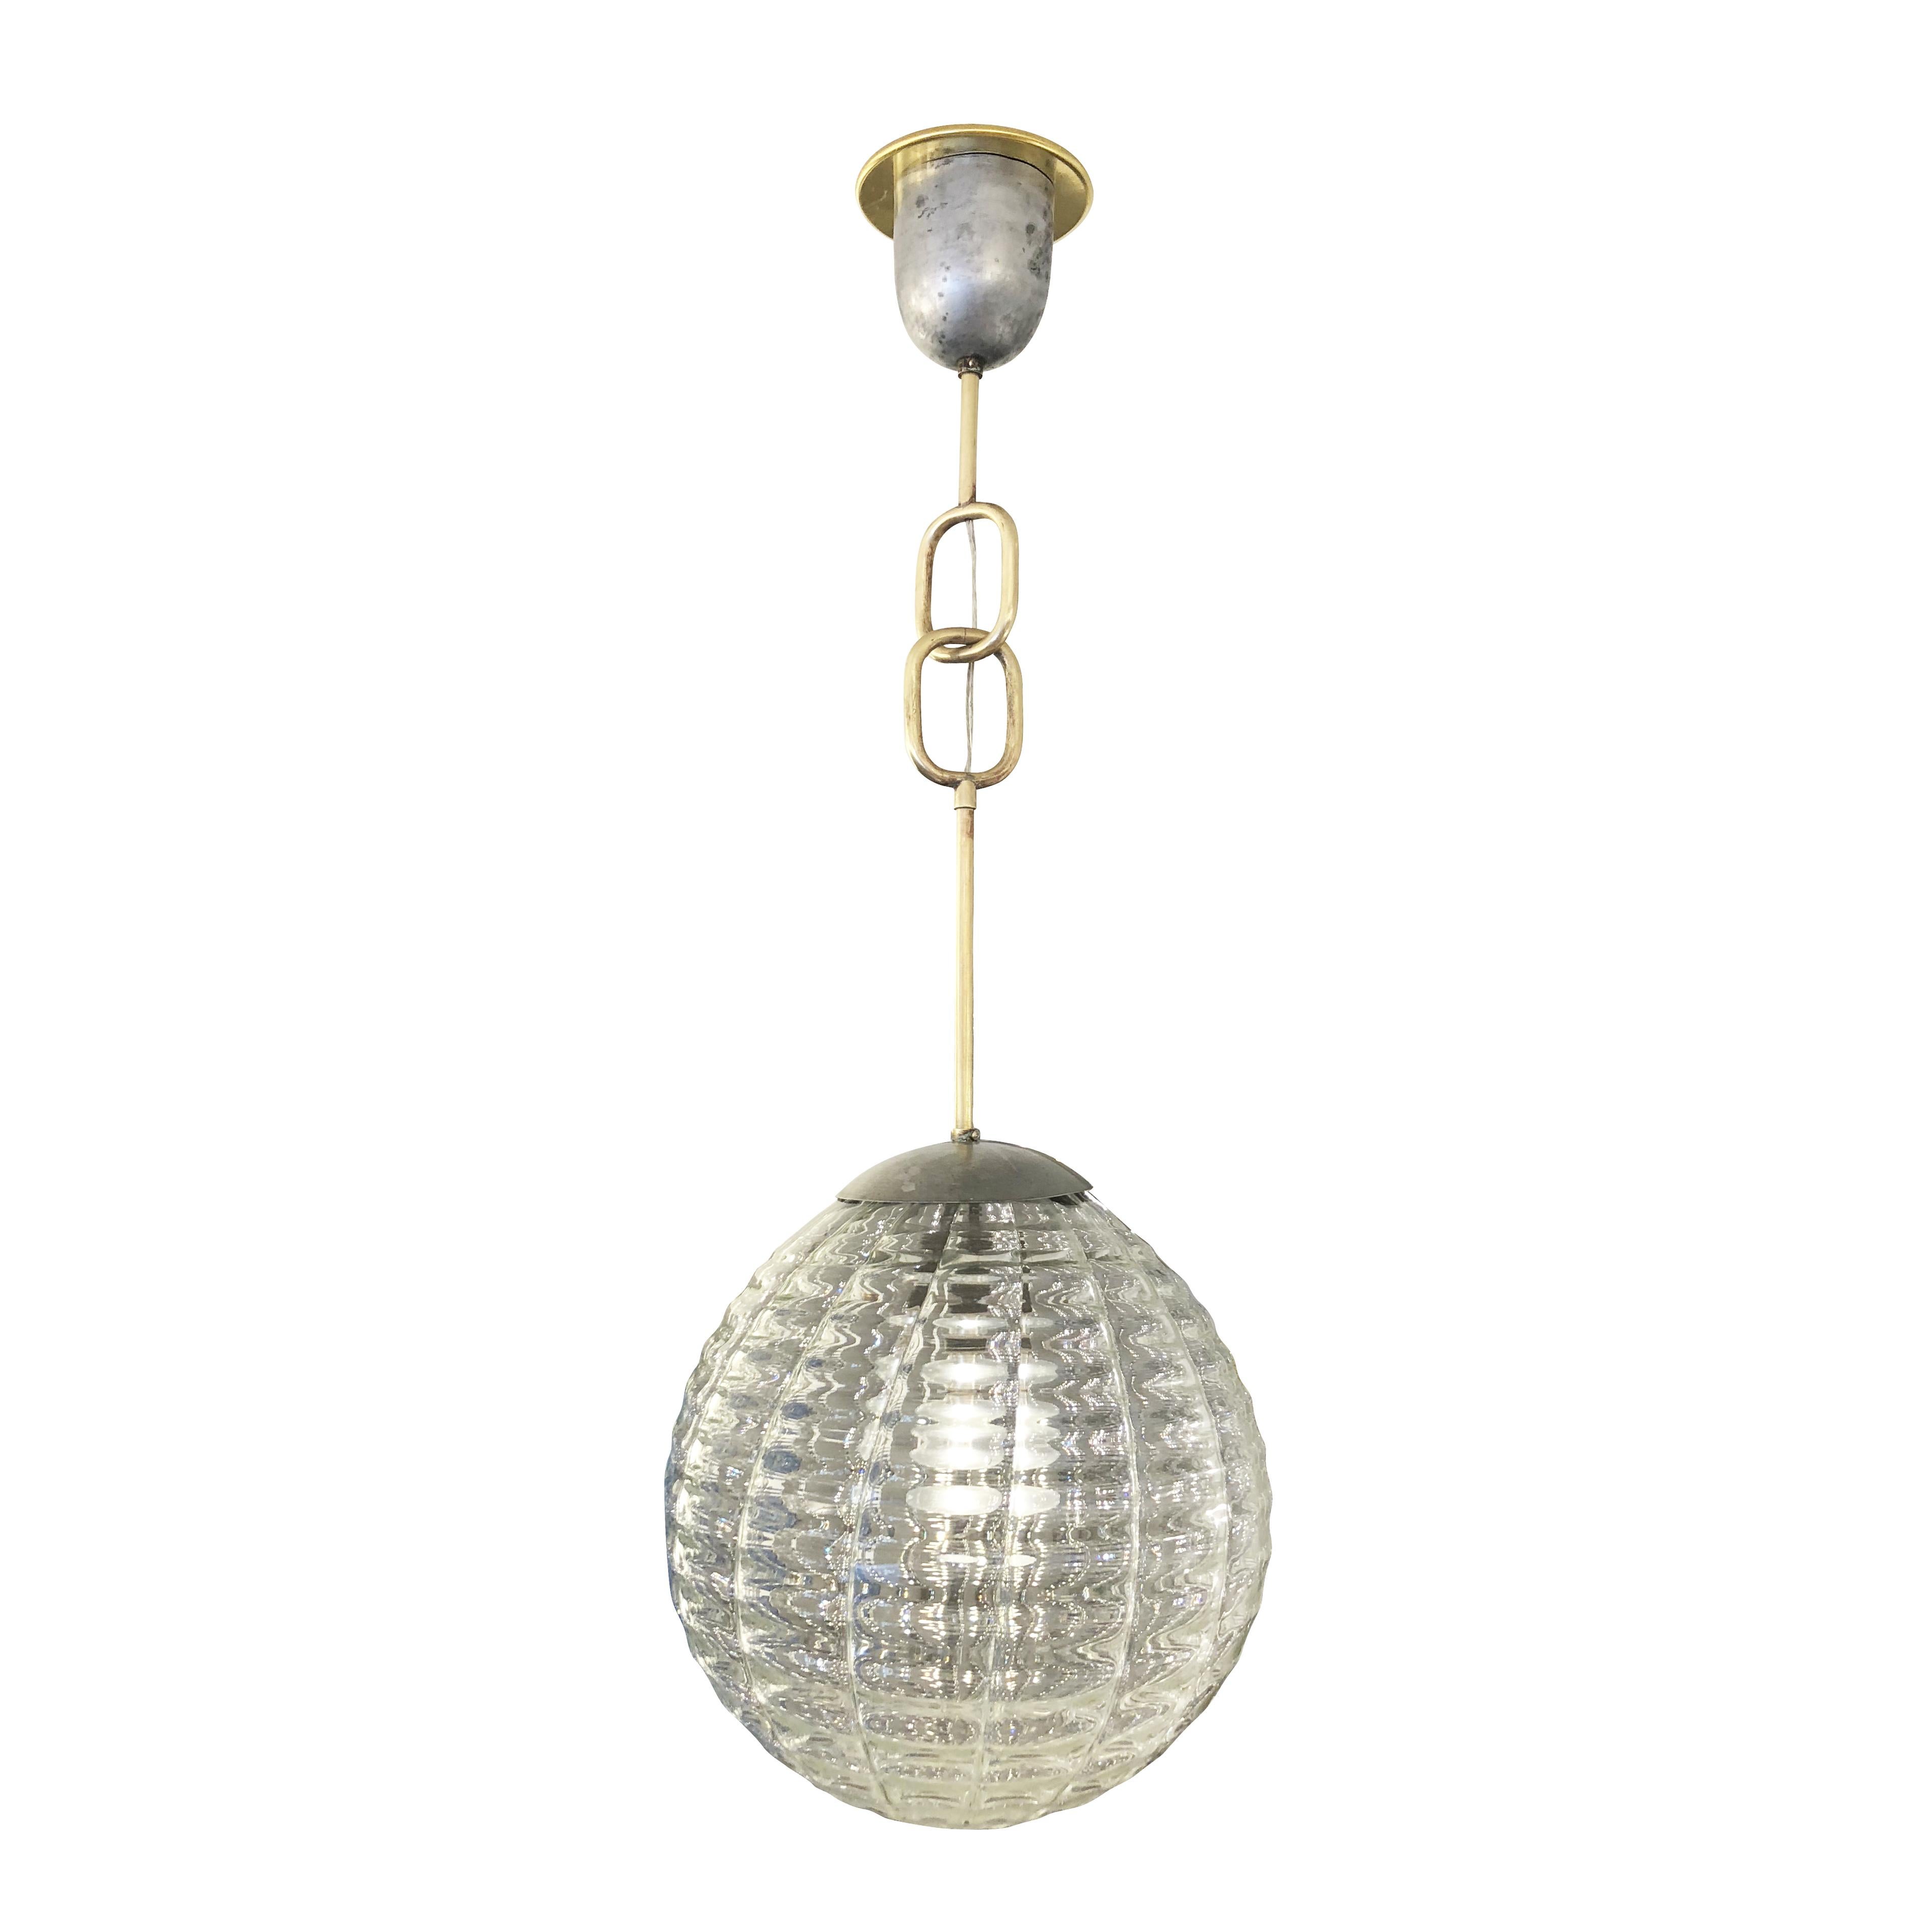 Stunning Murano glass pendant made by Venini in the 1940s. Particularly attractive is the large brass chain which gives the piece an imposing presence. Canopy and glass CAP are nickel for a balanced mixed metal look. Holds one regular